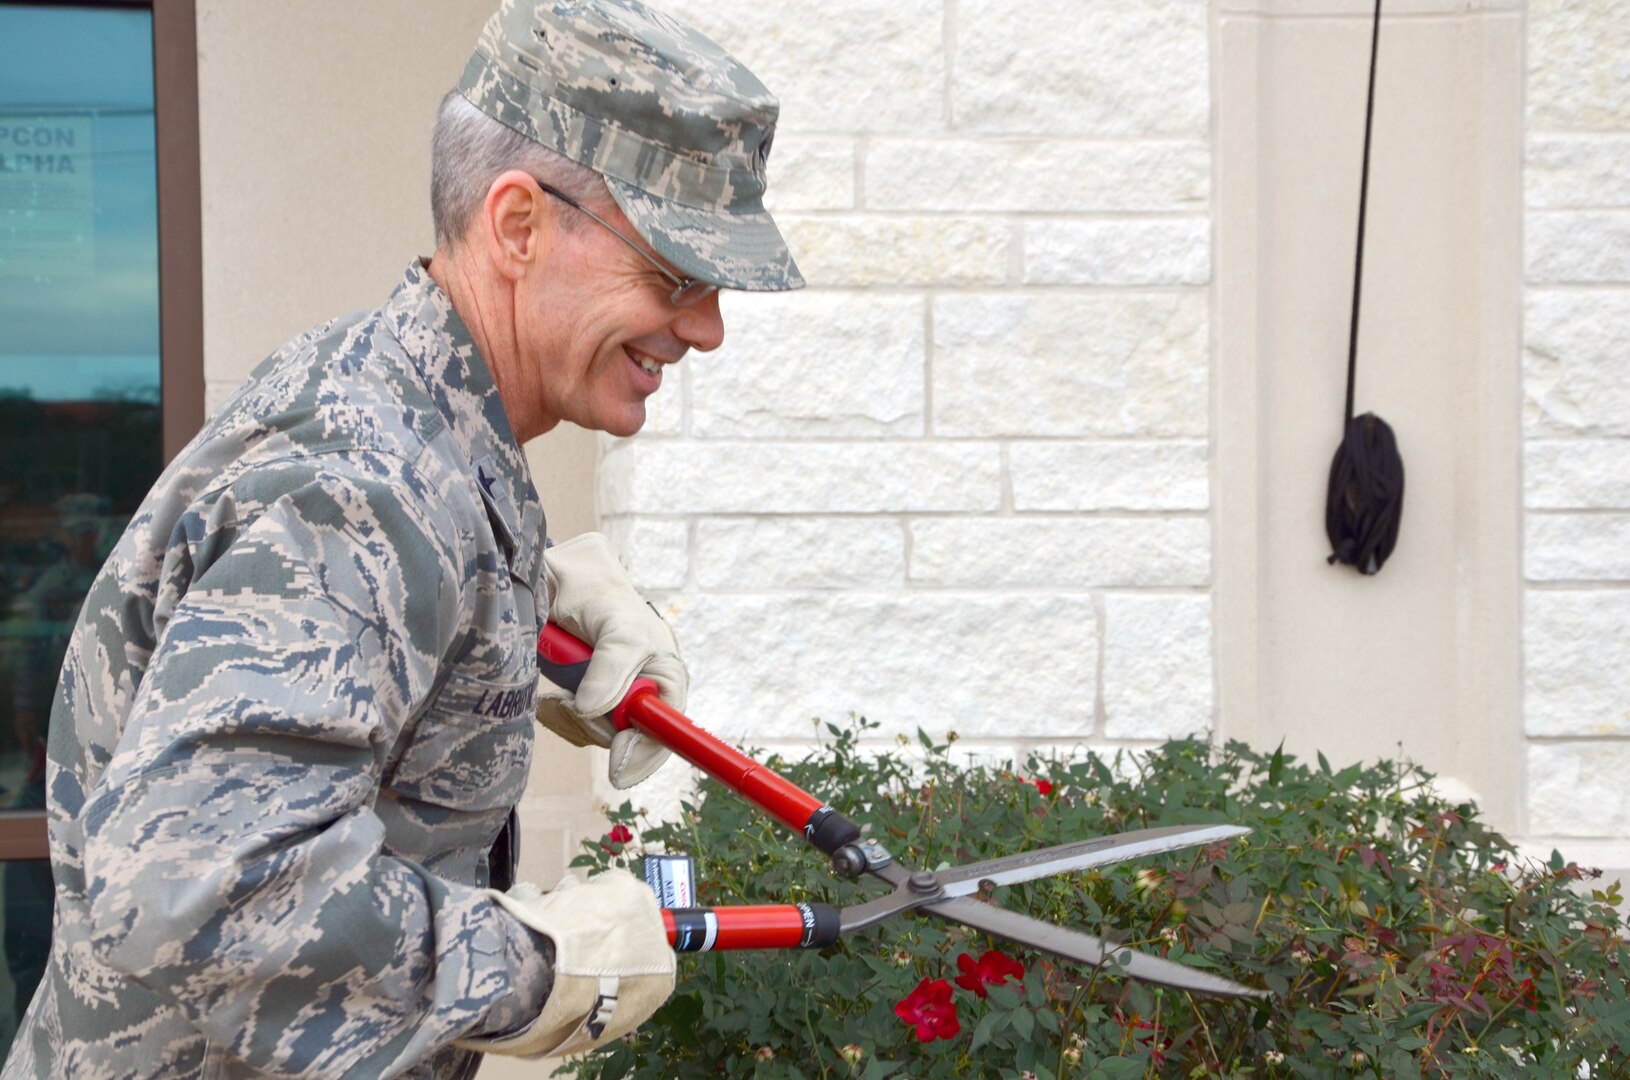 Brig. Gen. Bob LaBrutta, Joint Base San Antonio and 502nd Air Base Wing commander, prunes the bushes in front of building 247, the 502nd Air Base Wing headquarters, during Pride Day. (Photo by Lori Newman, JBSA-Fort Sam Houston Public Affairs)